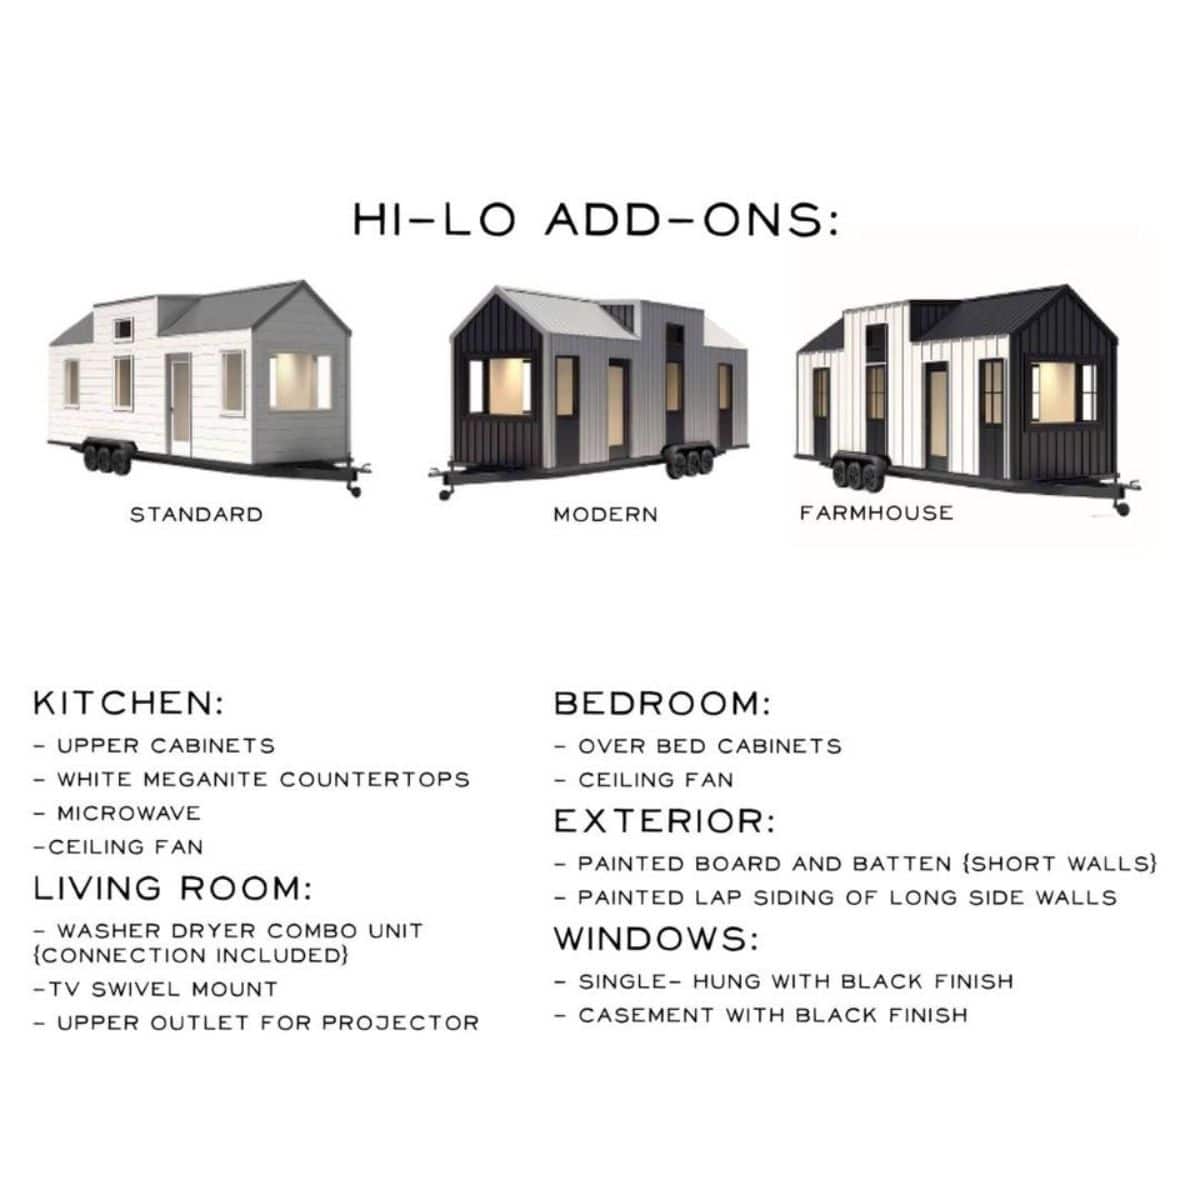 Three types of house designed by the builder